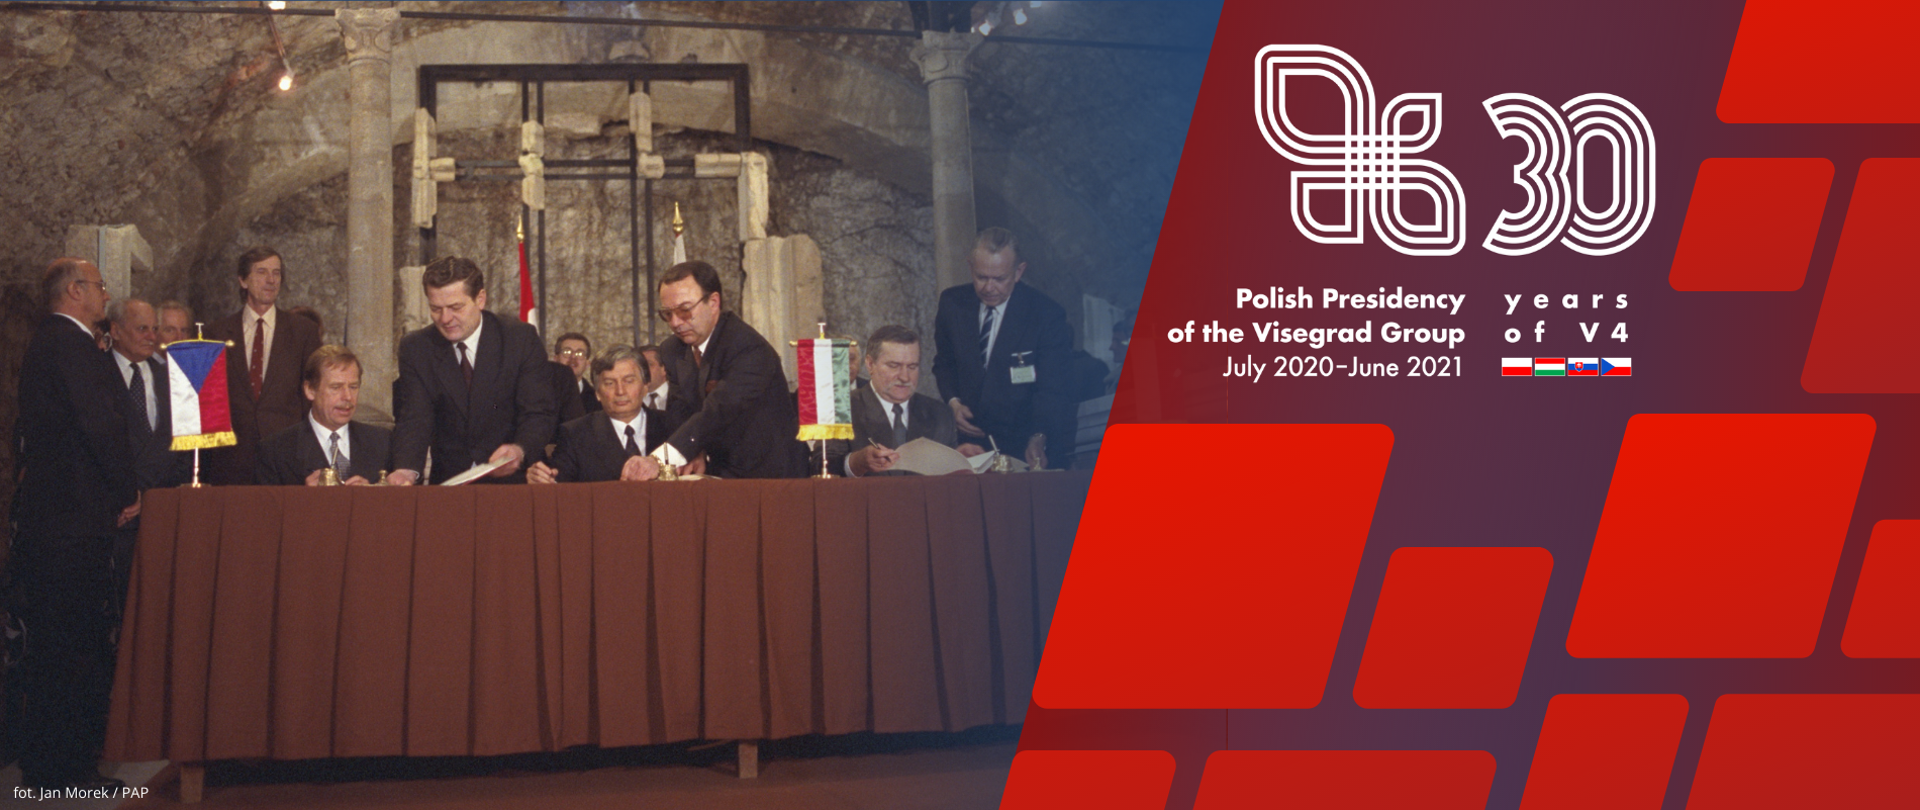 Thirty years ago, on 15 February 1991, the presidents of Poland and the Czech Republic, and the prime minister of Hungary signed the Declaration on Cooperation between the Czech and Slovak Federal Republic, the Republic of Poland and the Republic of Hungary in Striving for European Integration in the castle of Visegrad, Hungary.